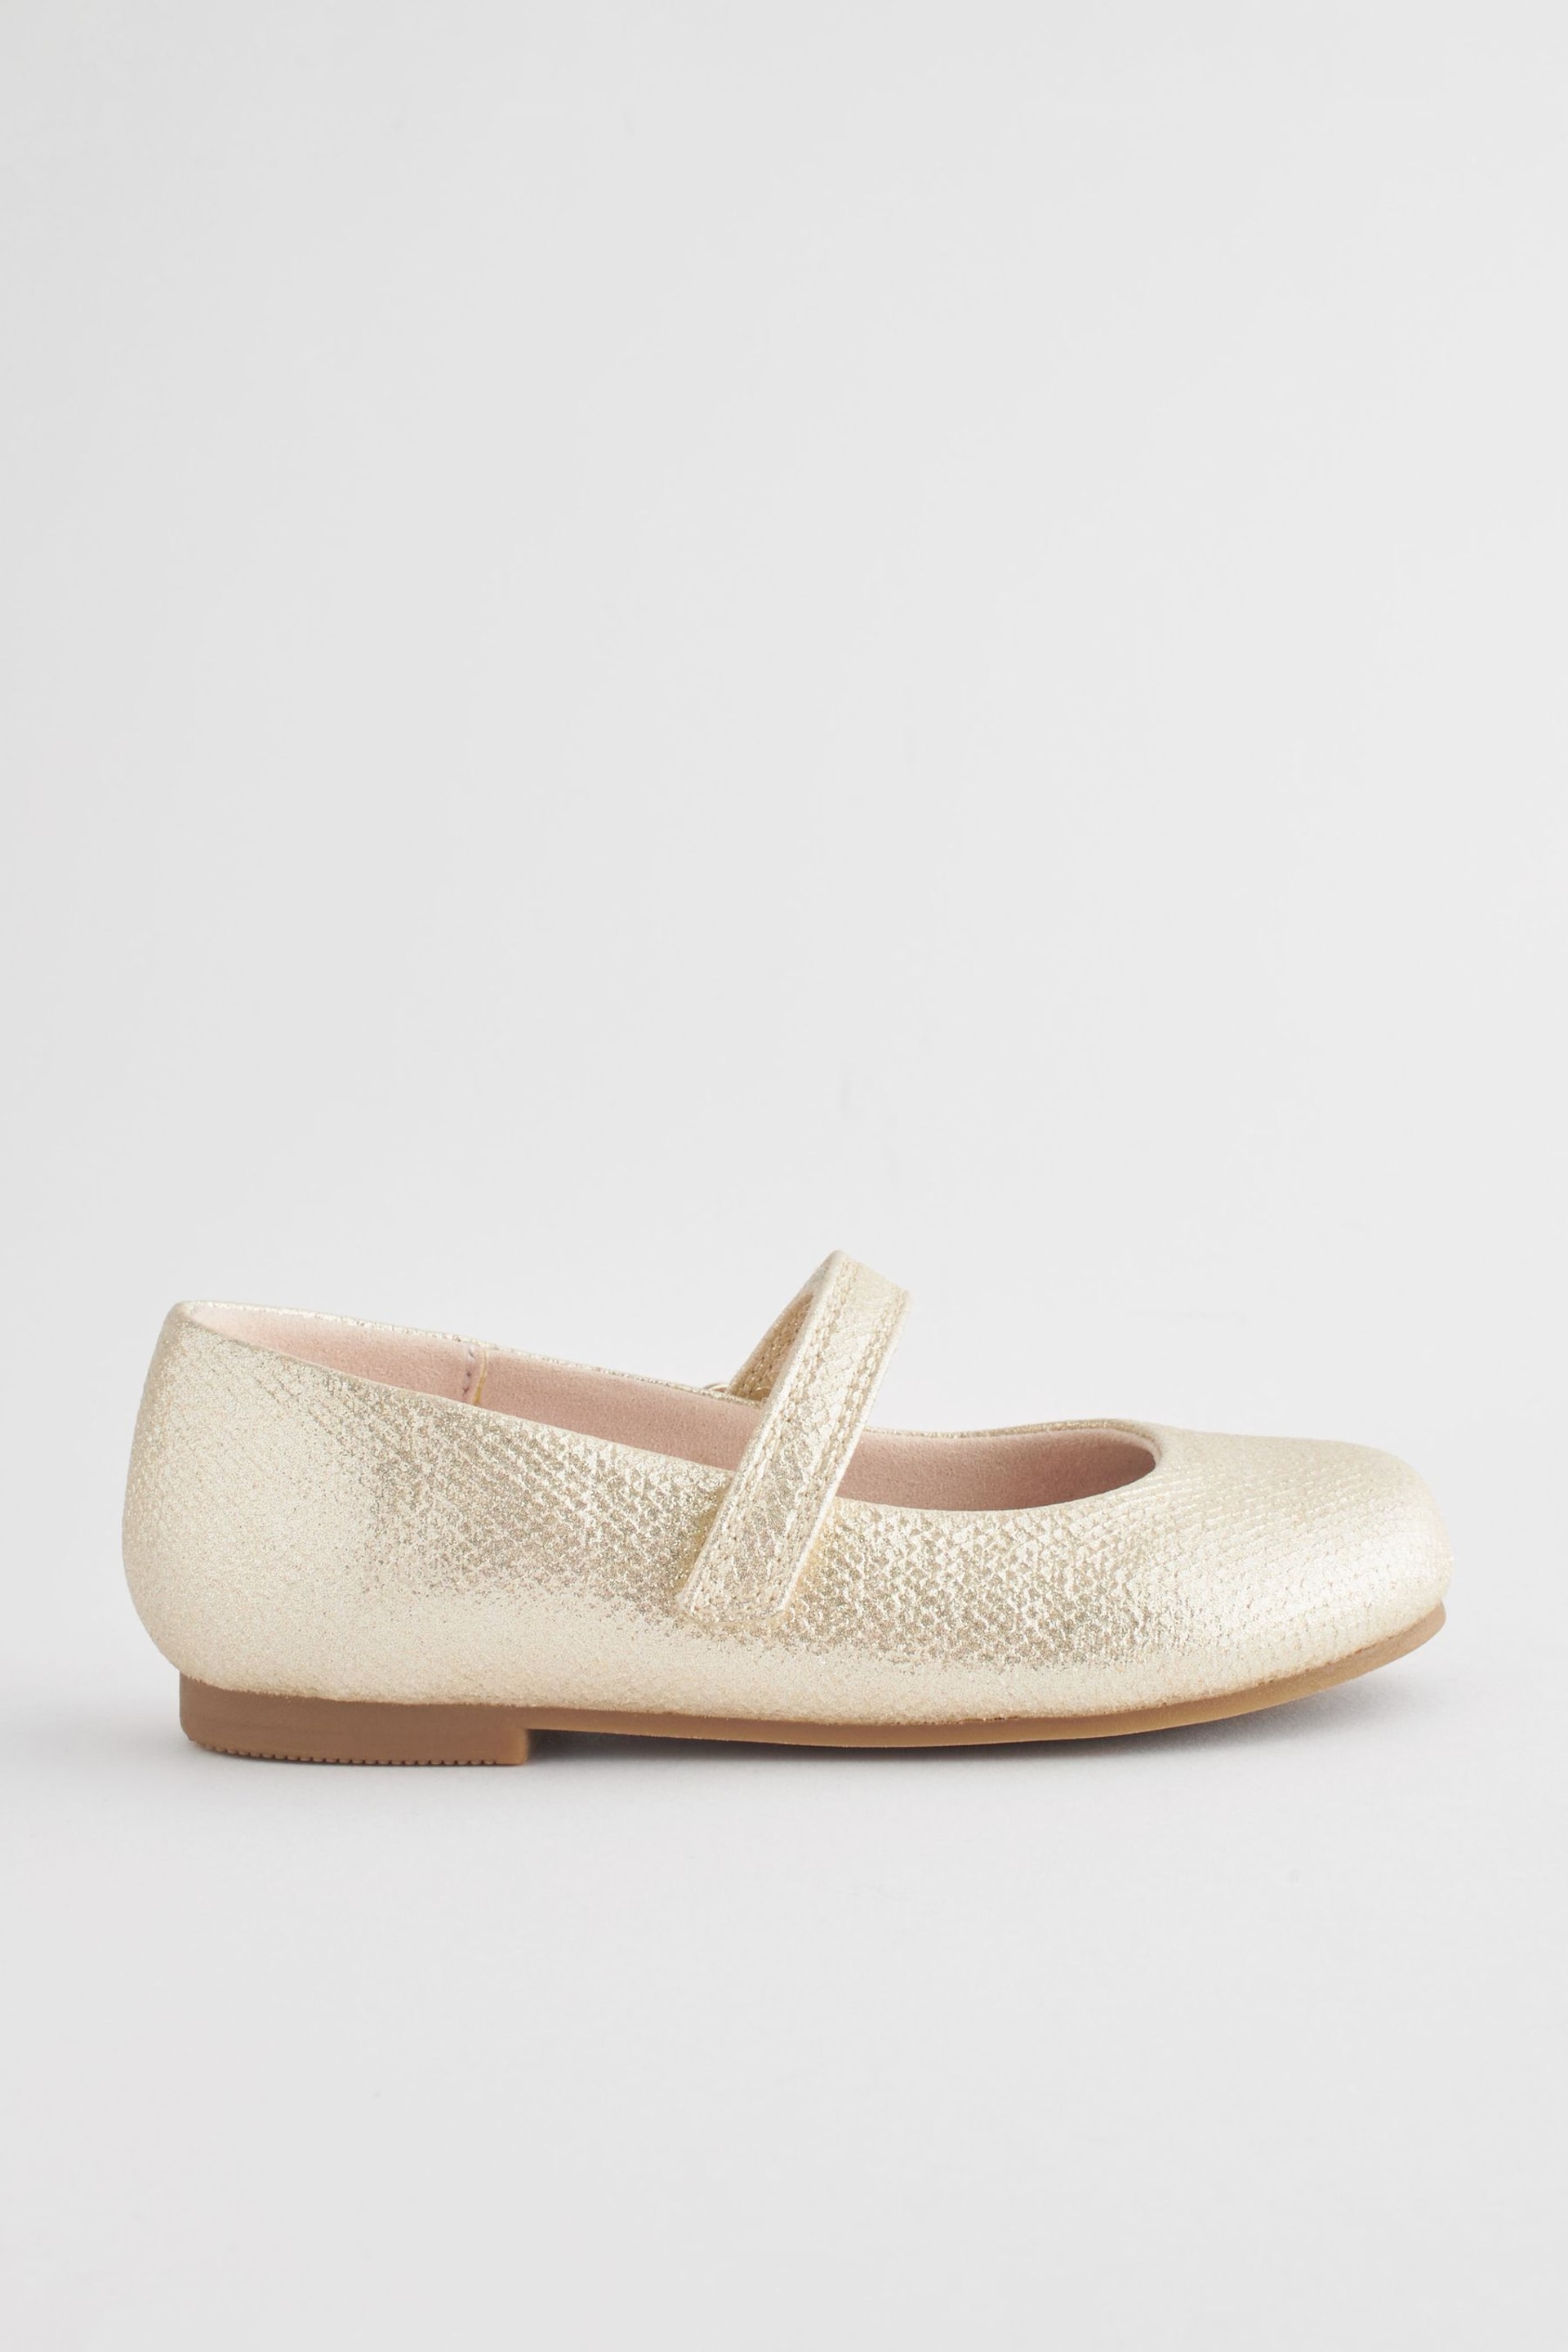 Gold Standard Fit (F) Mary Jane Occasion Shoes - Image 2 of 6